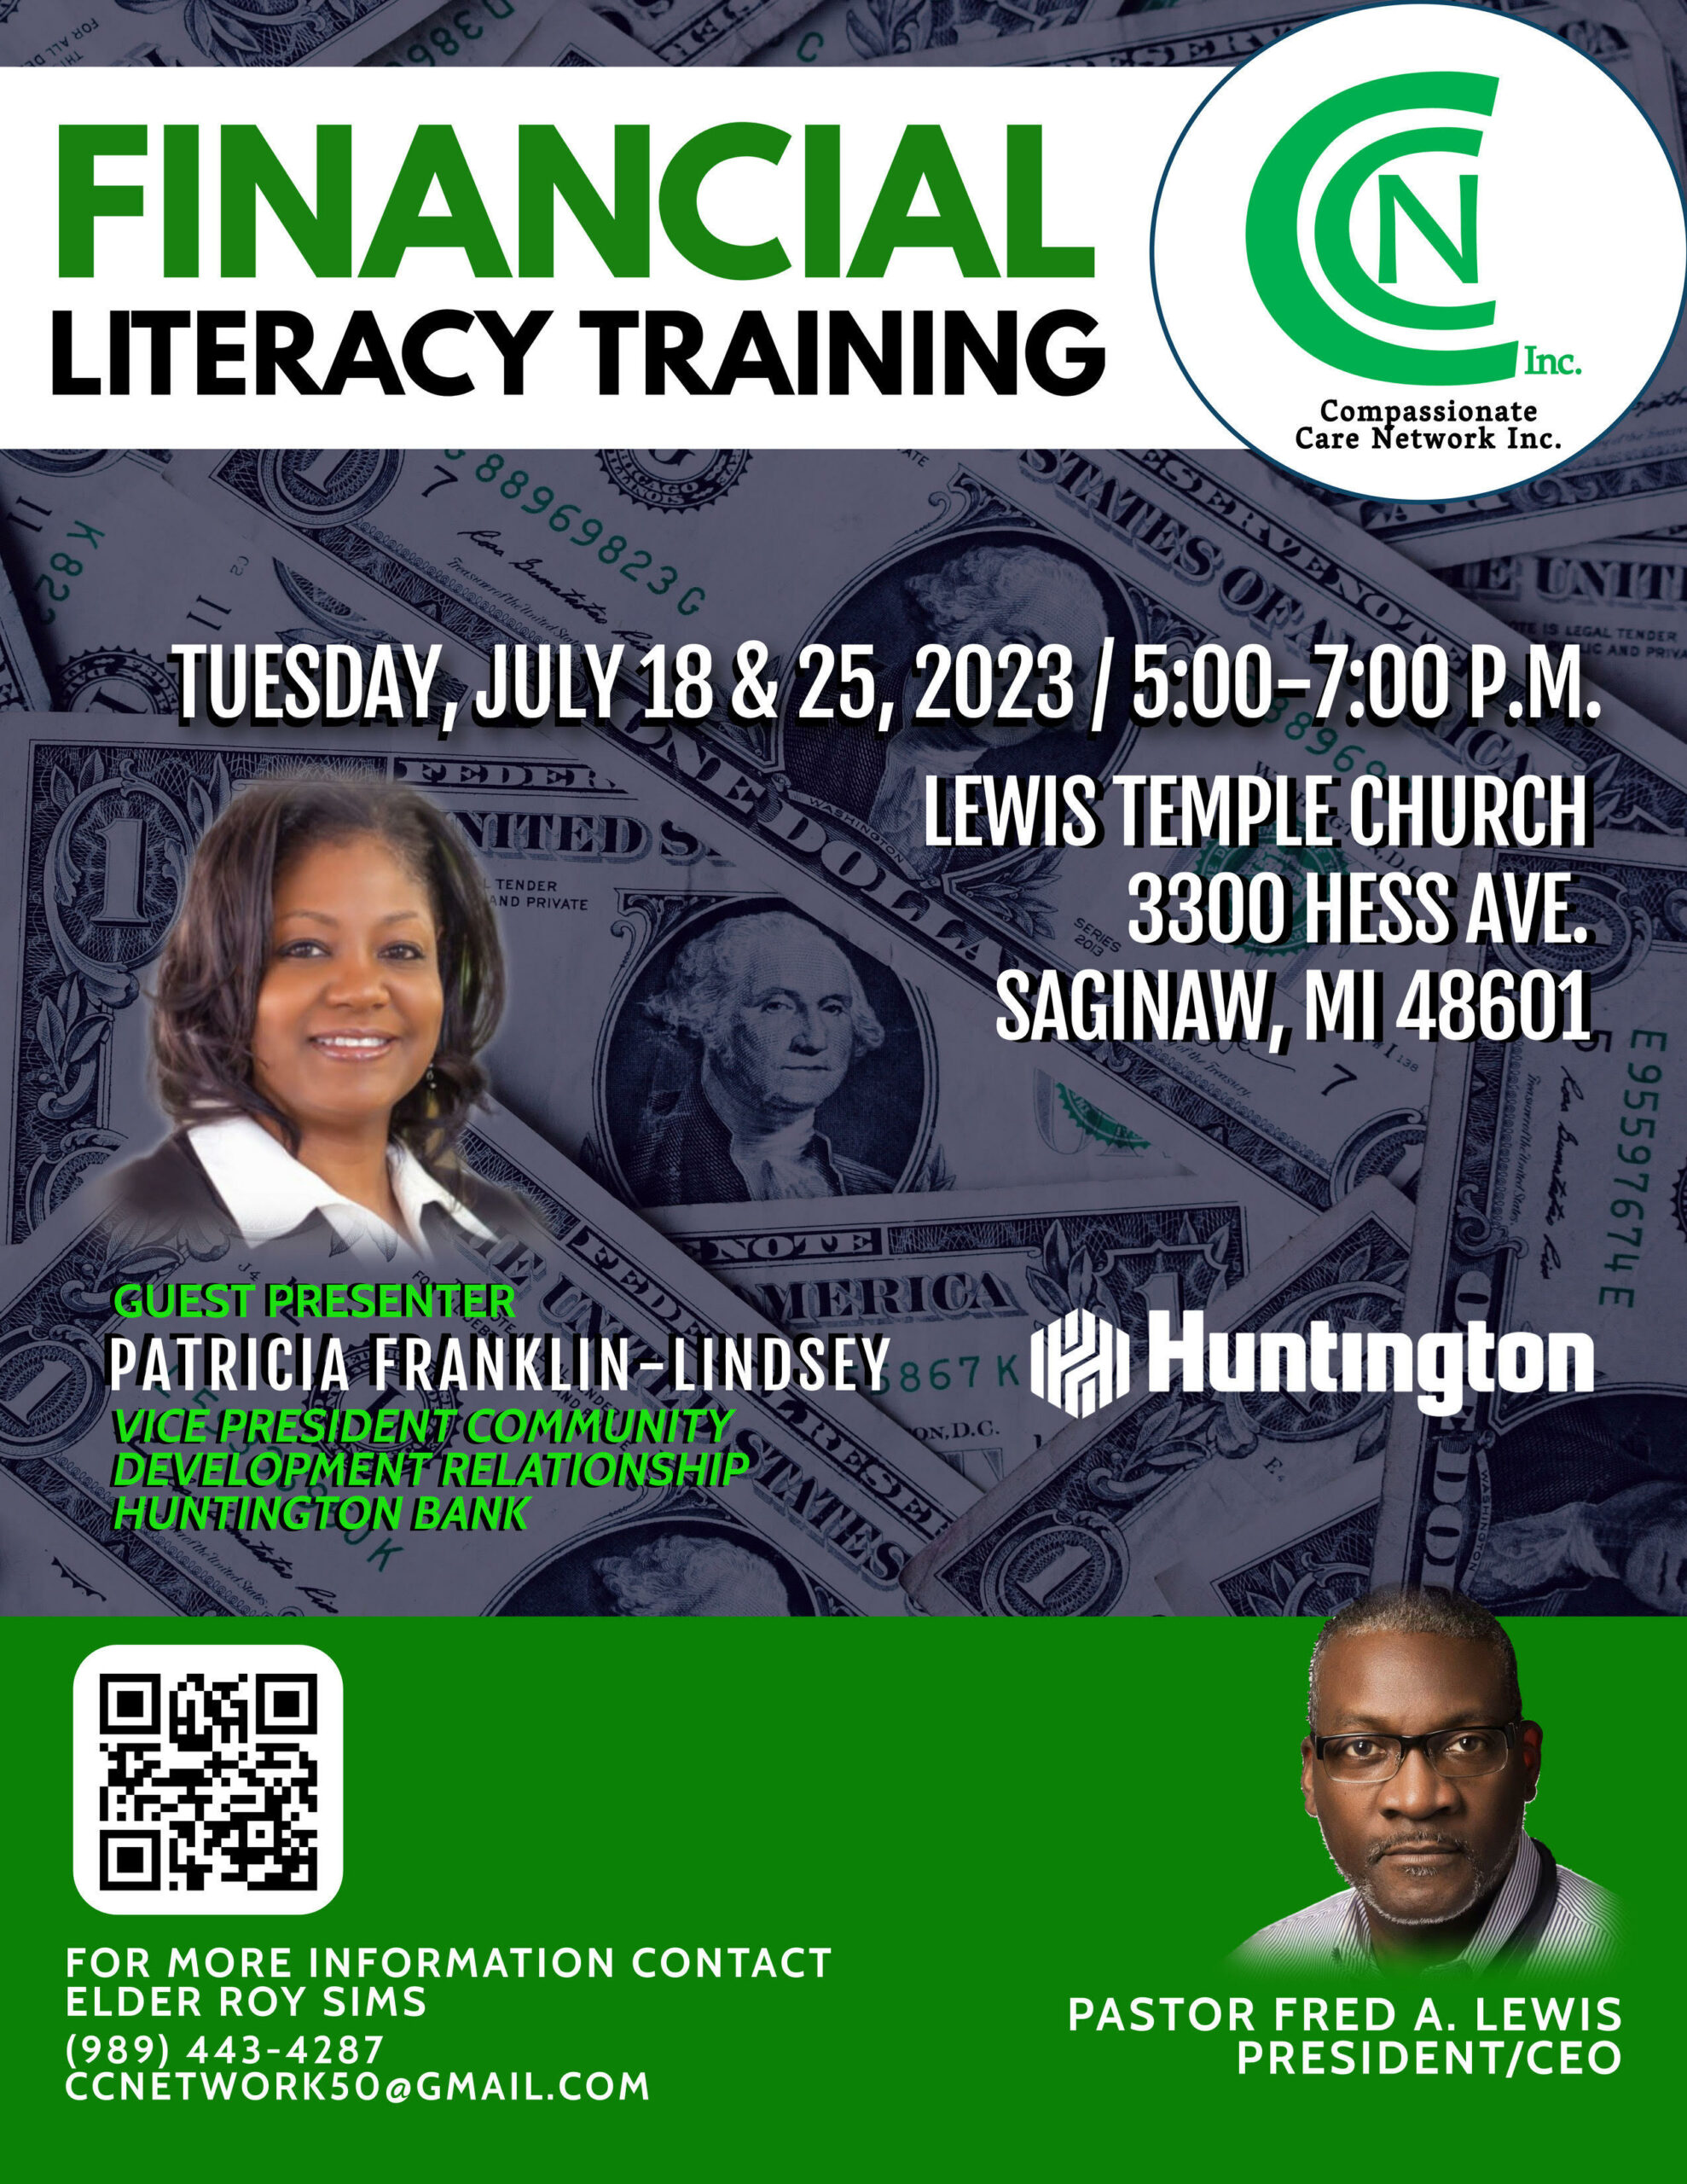 <h1 class="tribe-events-single-event-title">FINANCIAL LITERACY TRAINING</h1>